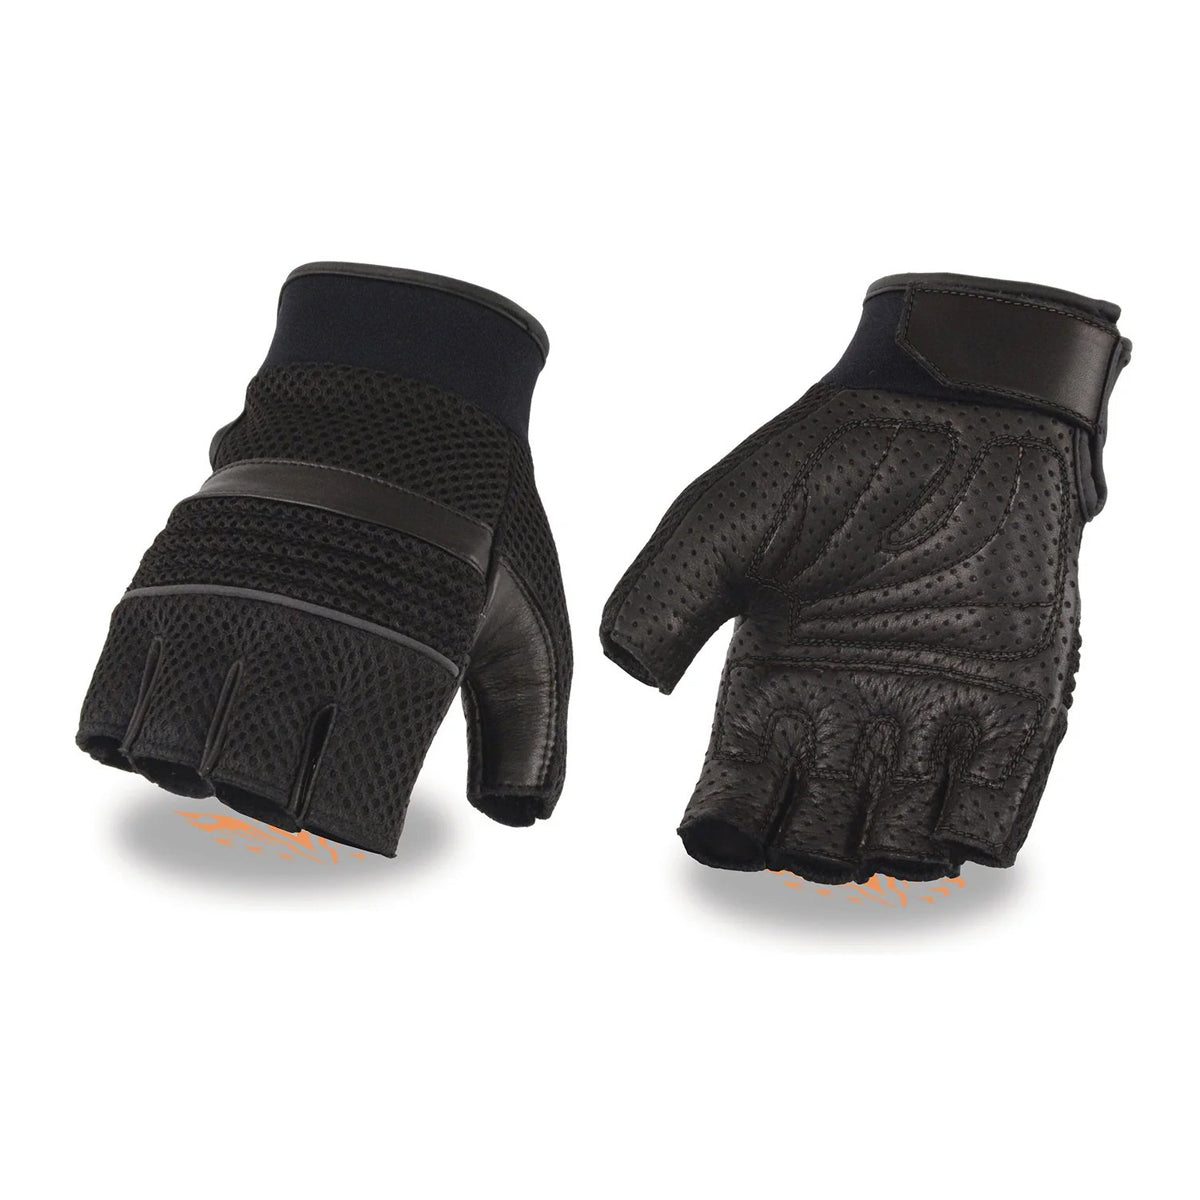 Men's Black Perforated Mesh Gel Palm Fingerless Motorcycle Hand Gloves W/ ‘Reflective Piping’